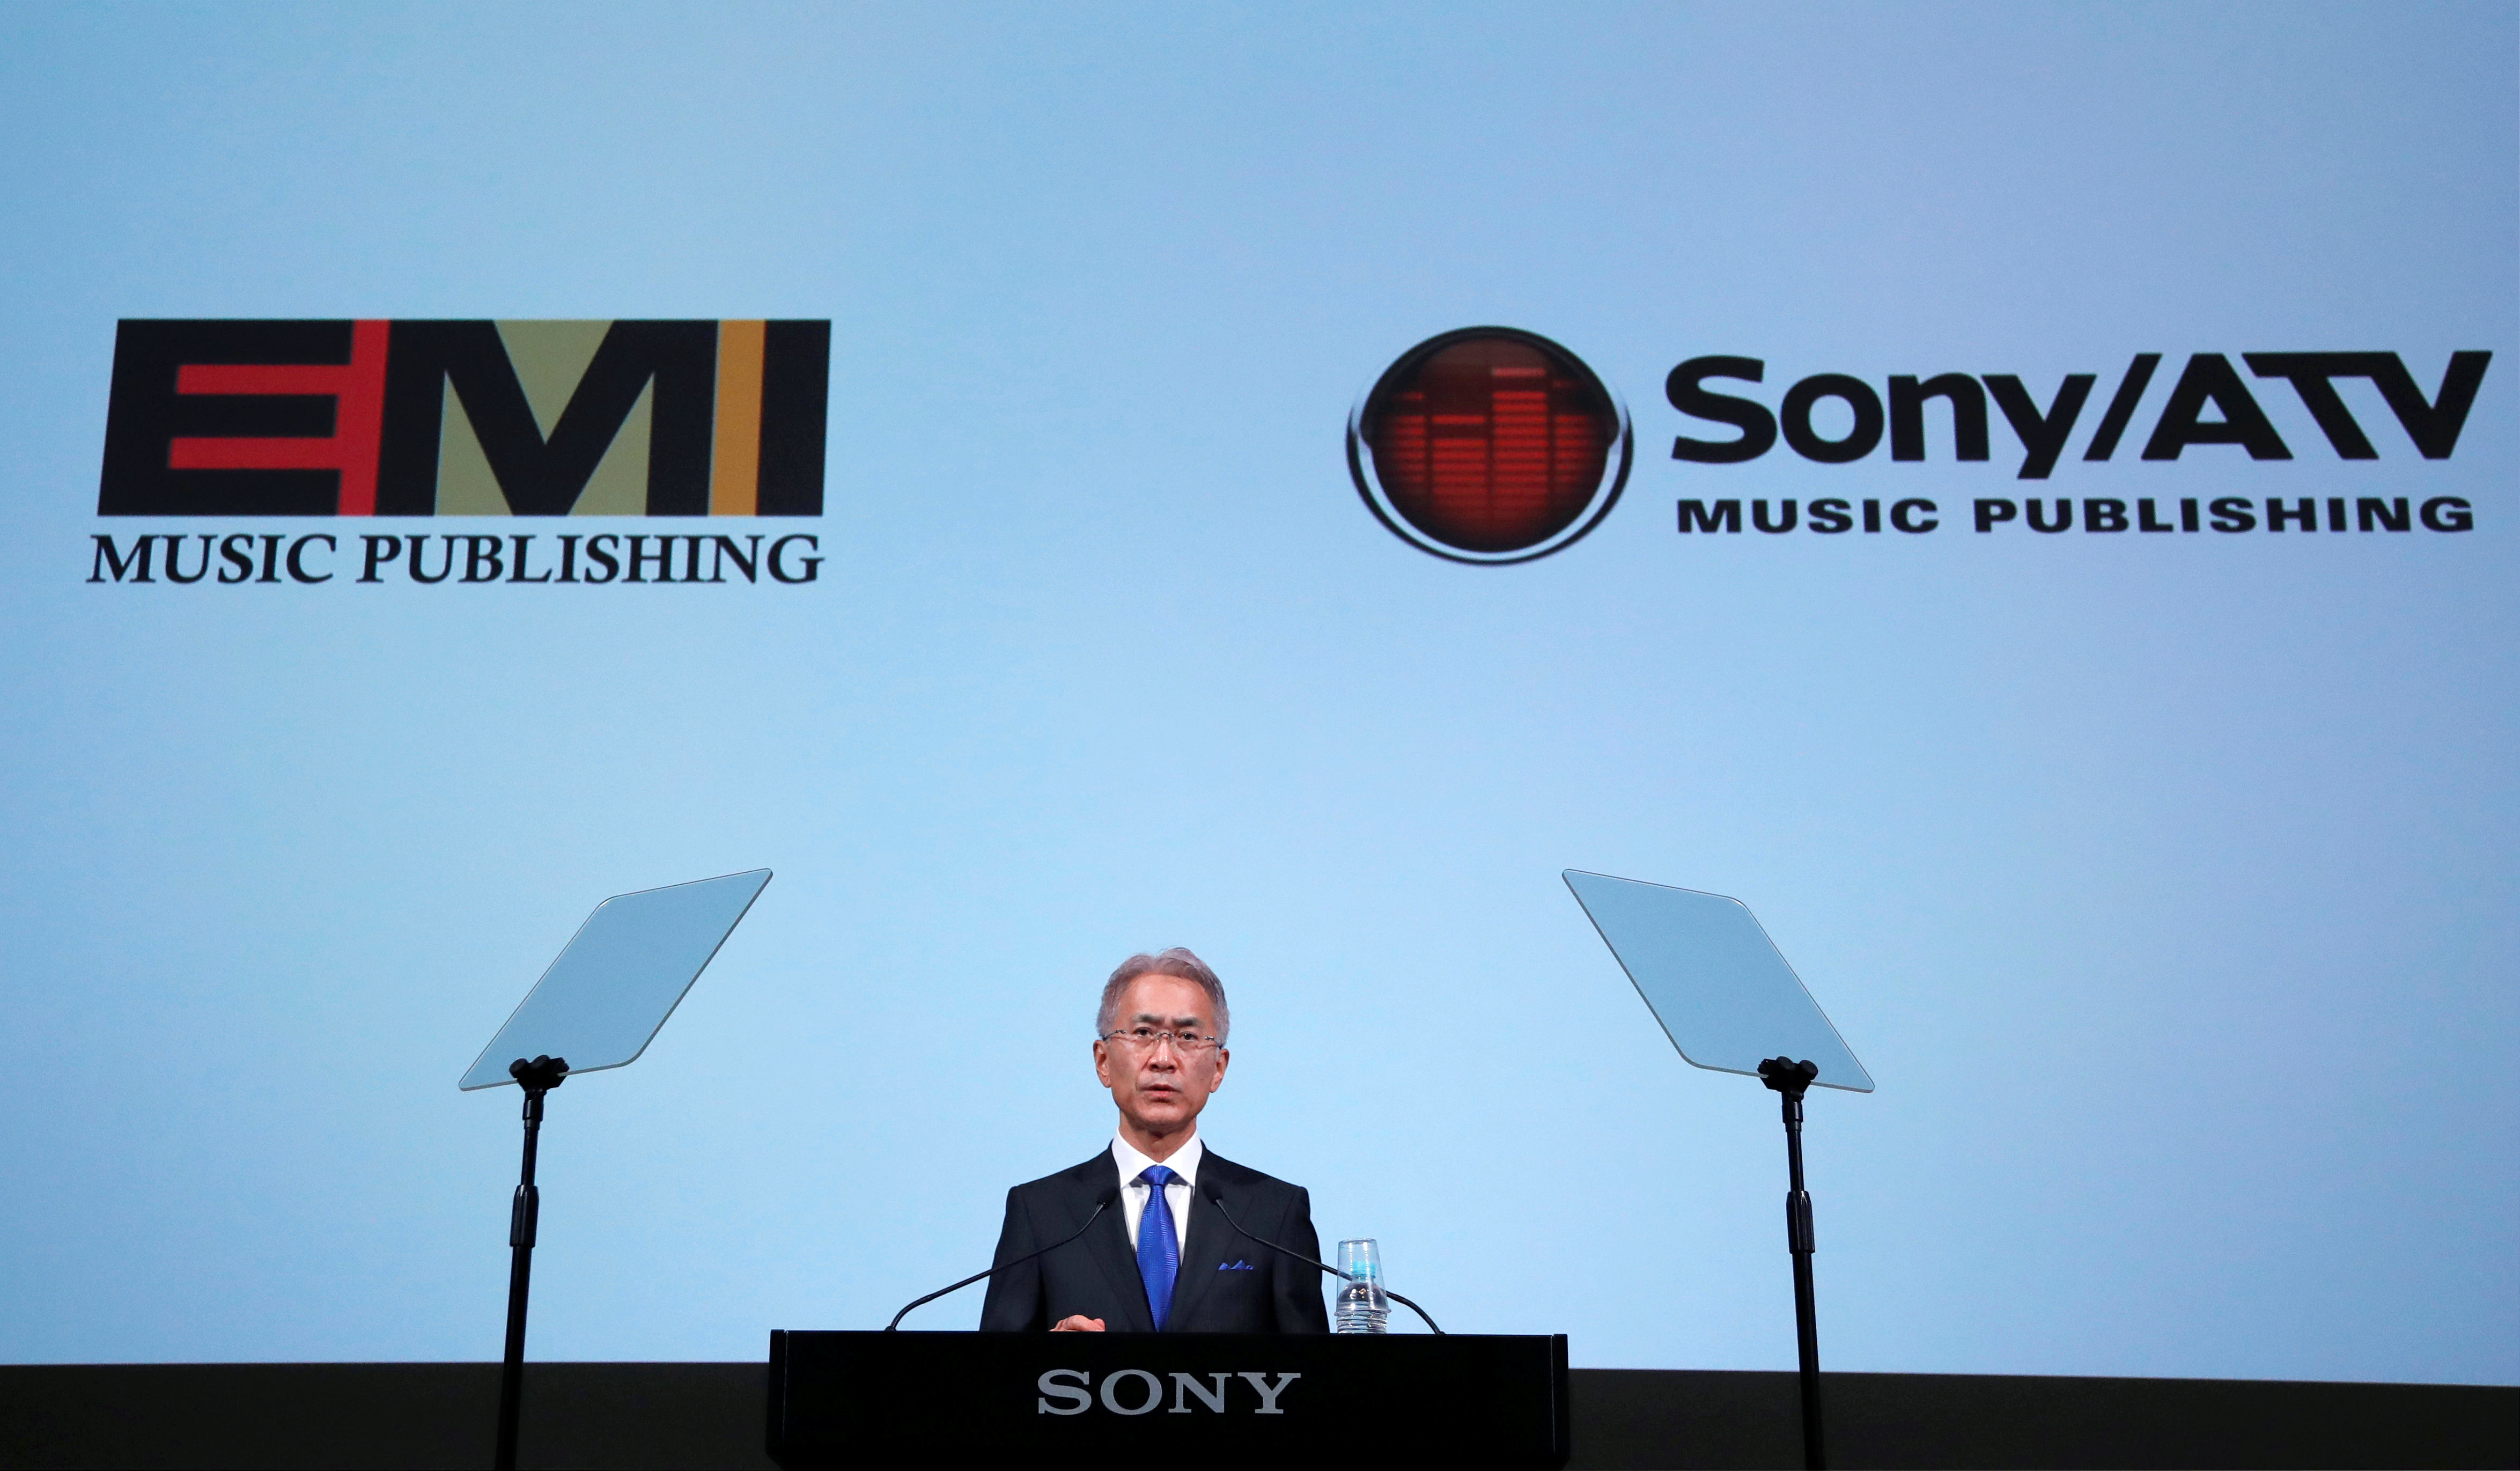 Sony to become world's No.1 music publisher with $2.3 billion EMI deal